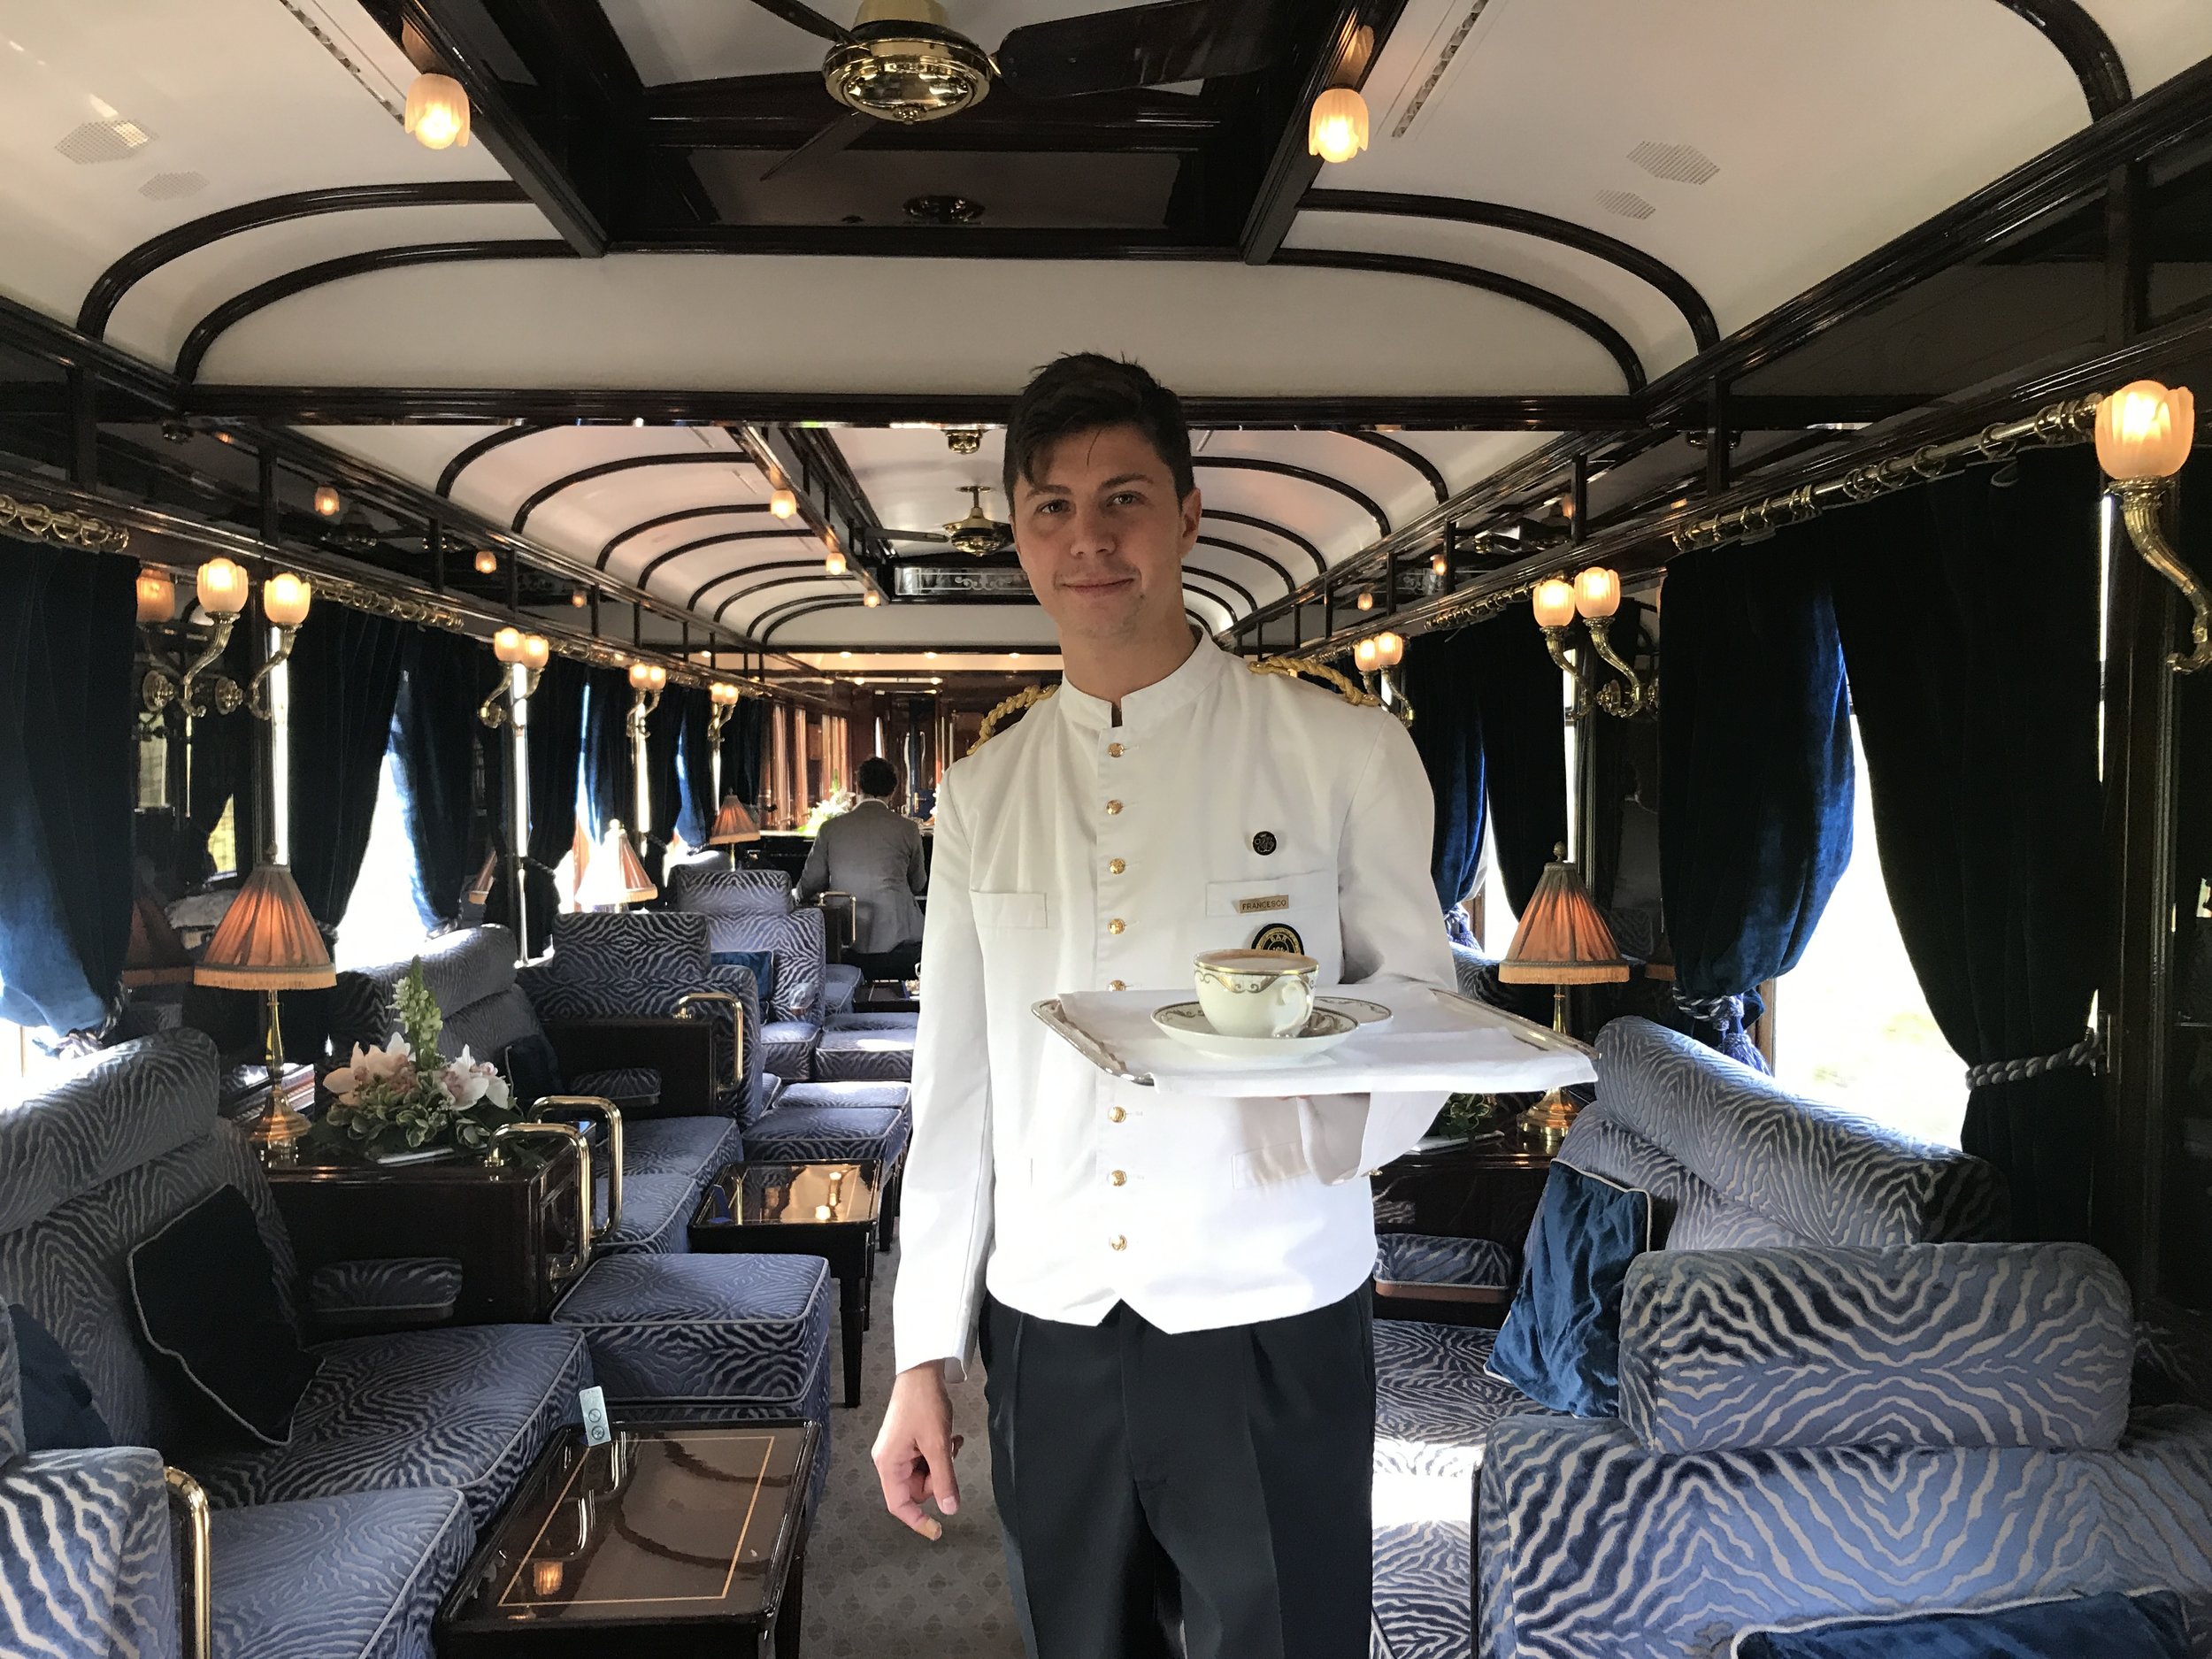 Three new 'grand suites' for the Venice Simplon-Orient-Express